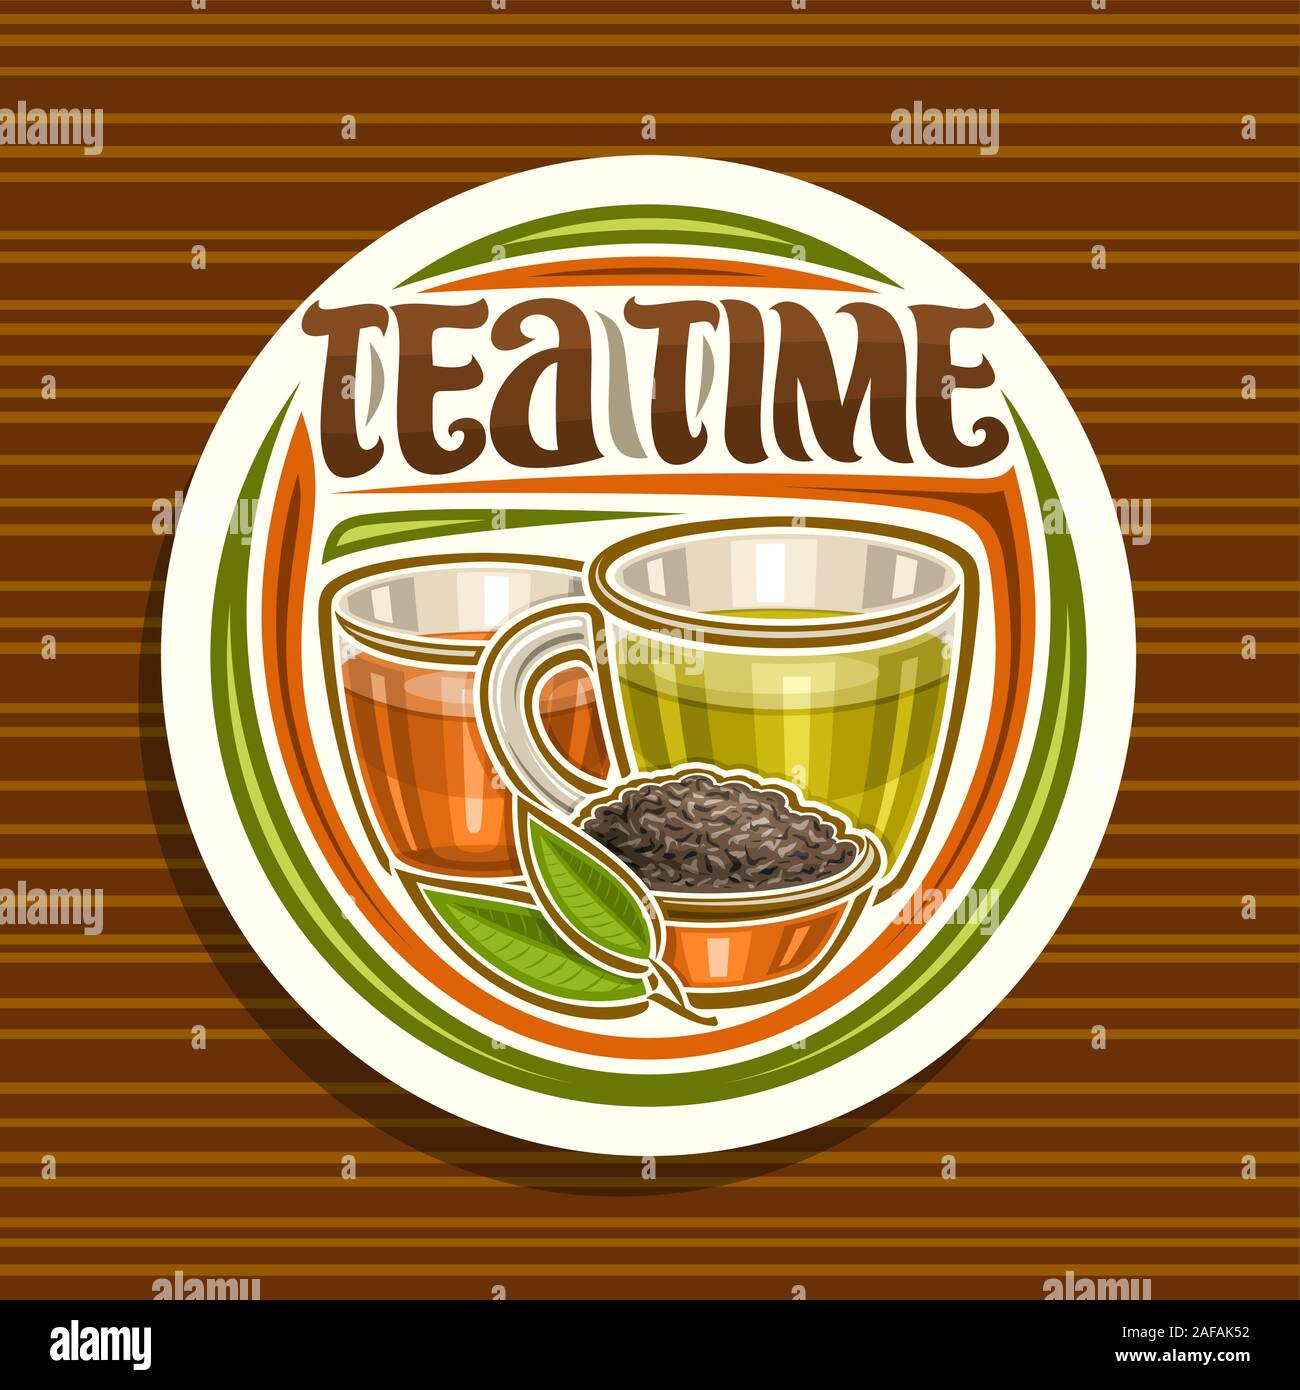 Vector logo for Tea Time, round badge with illustration of 2 glass cups with yellow and brown liquid, metal bowl with loose tea and sprig, decorative Stock Vector